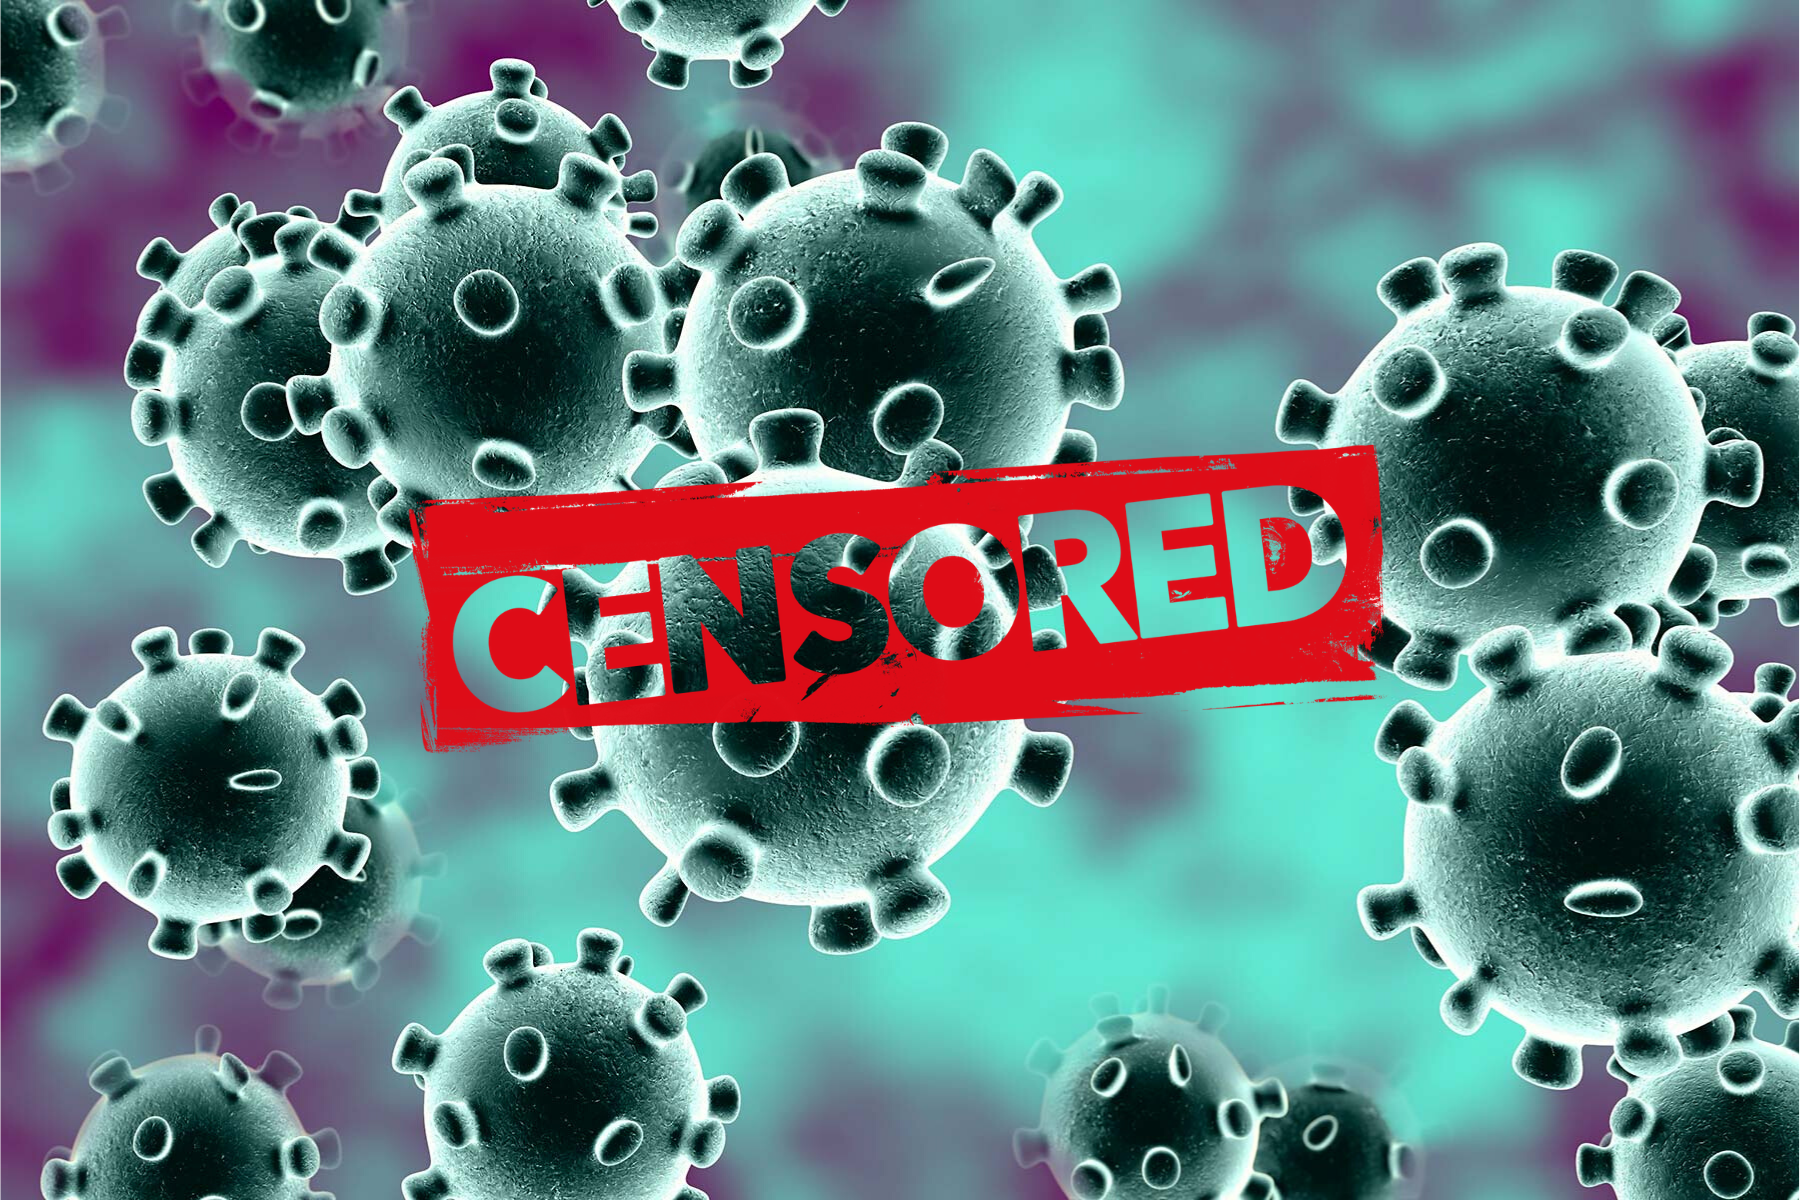 Freedom of speech in a pandemic and the role of censorship in spreading of COVID-19